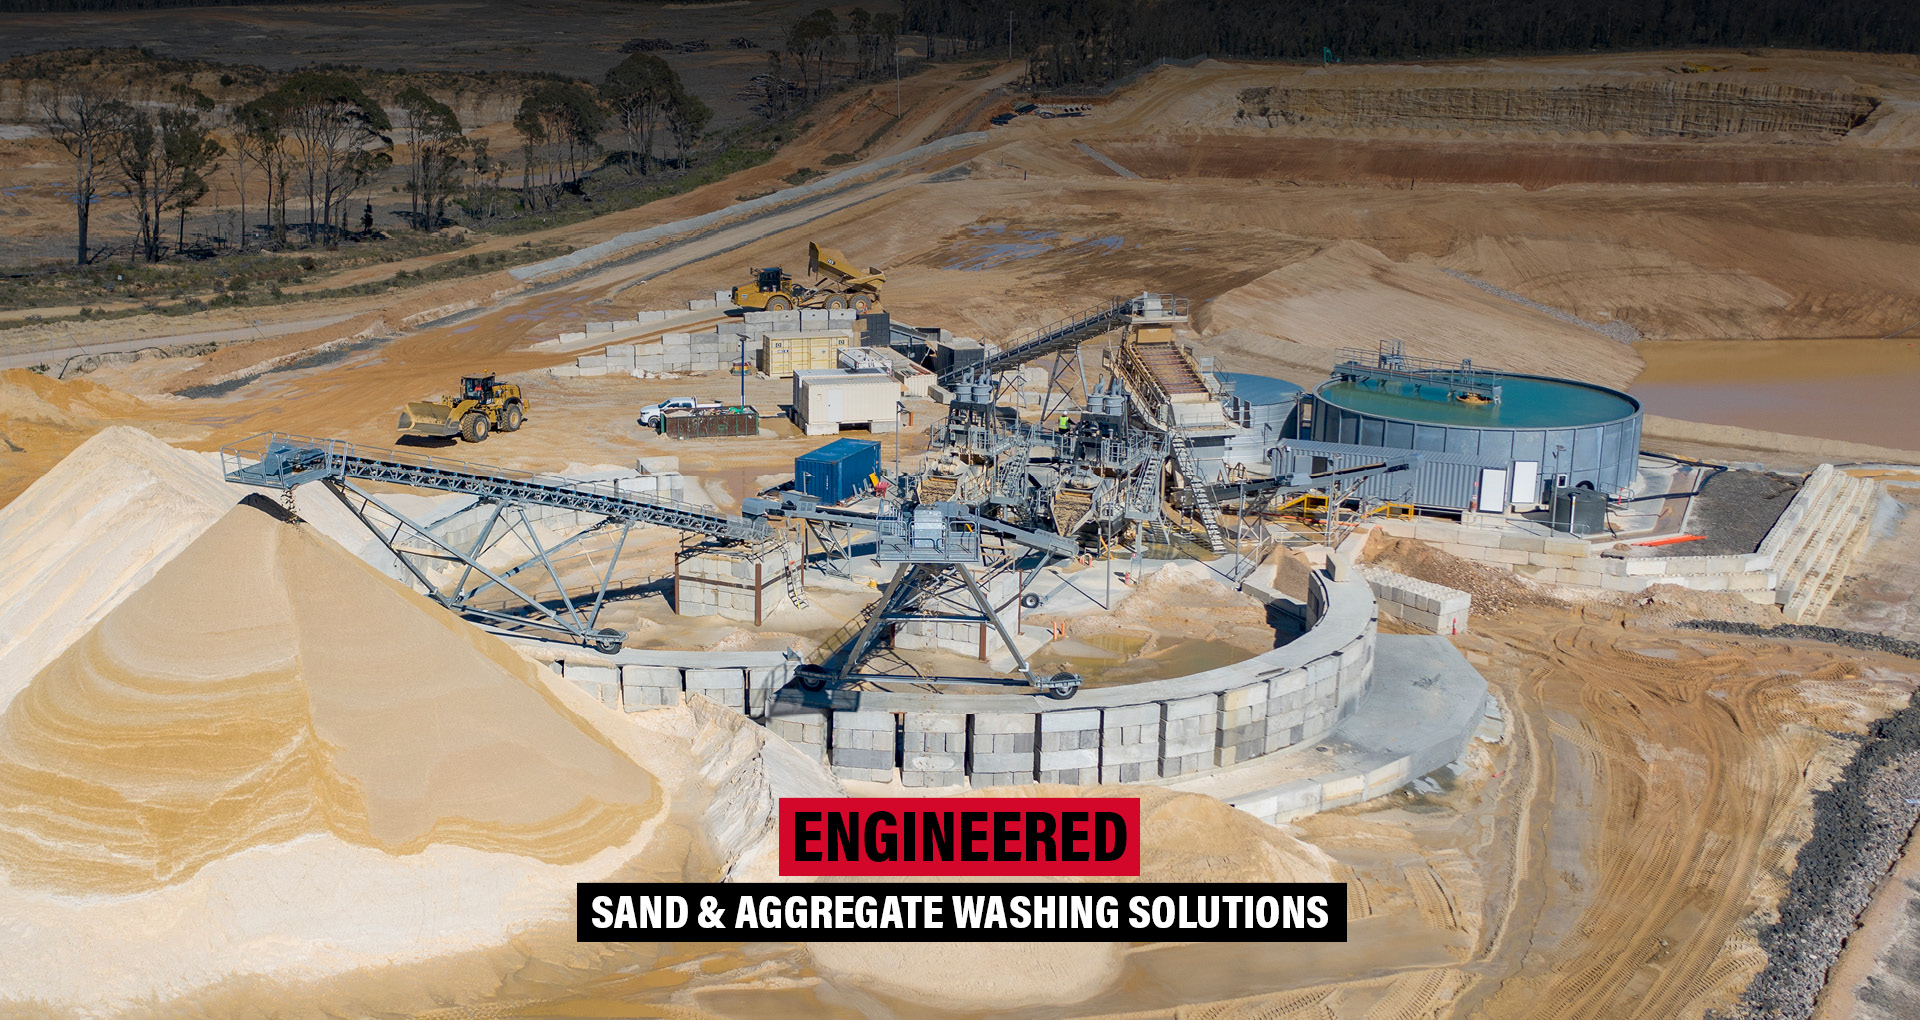 Engineered Sand & Aggregate Washing Solutions